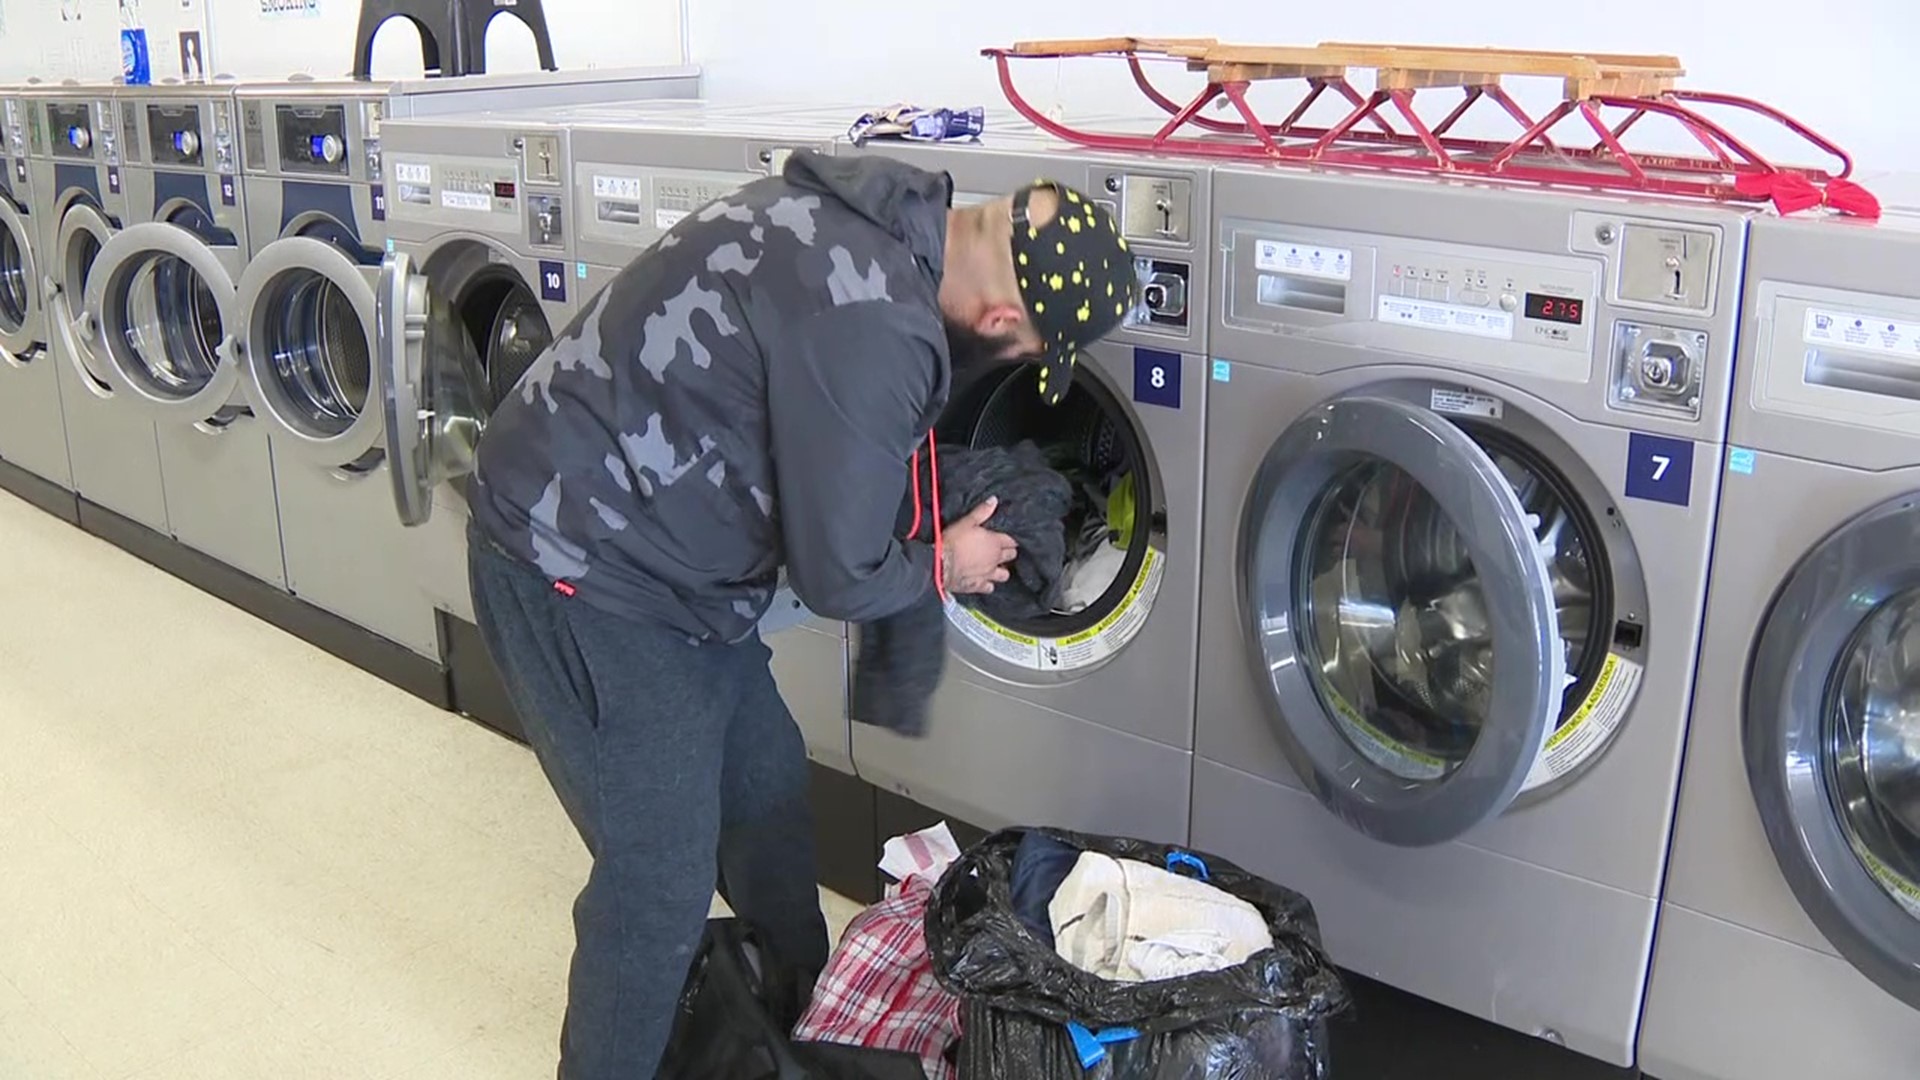 A place in Sunbury is opening its laundromat and letting people wash clothes for free on Thanksgiving Day.